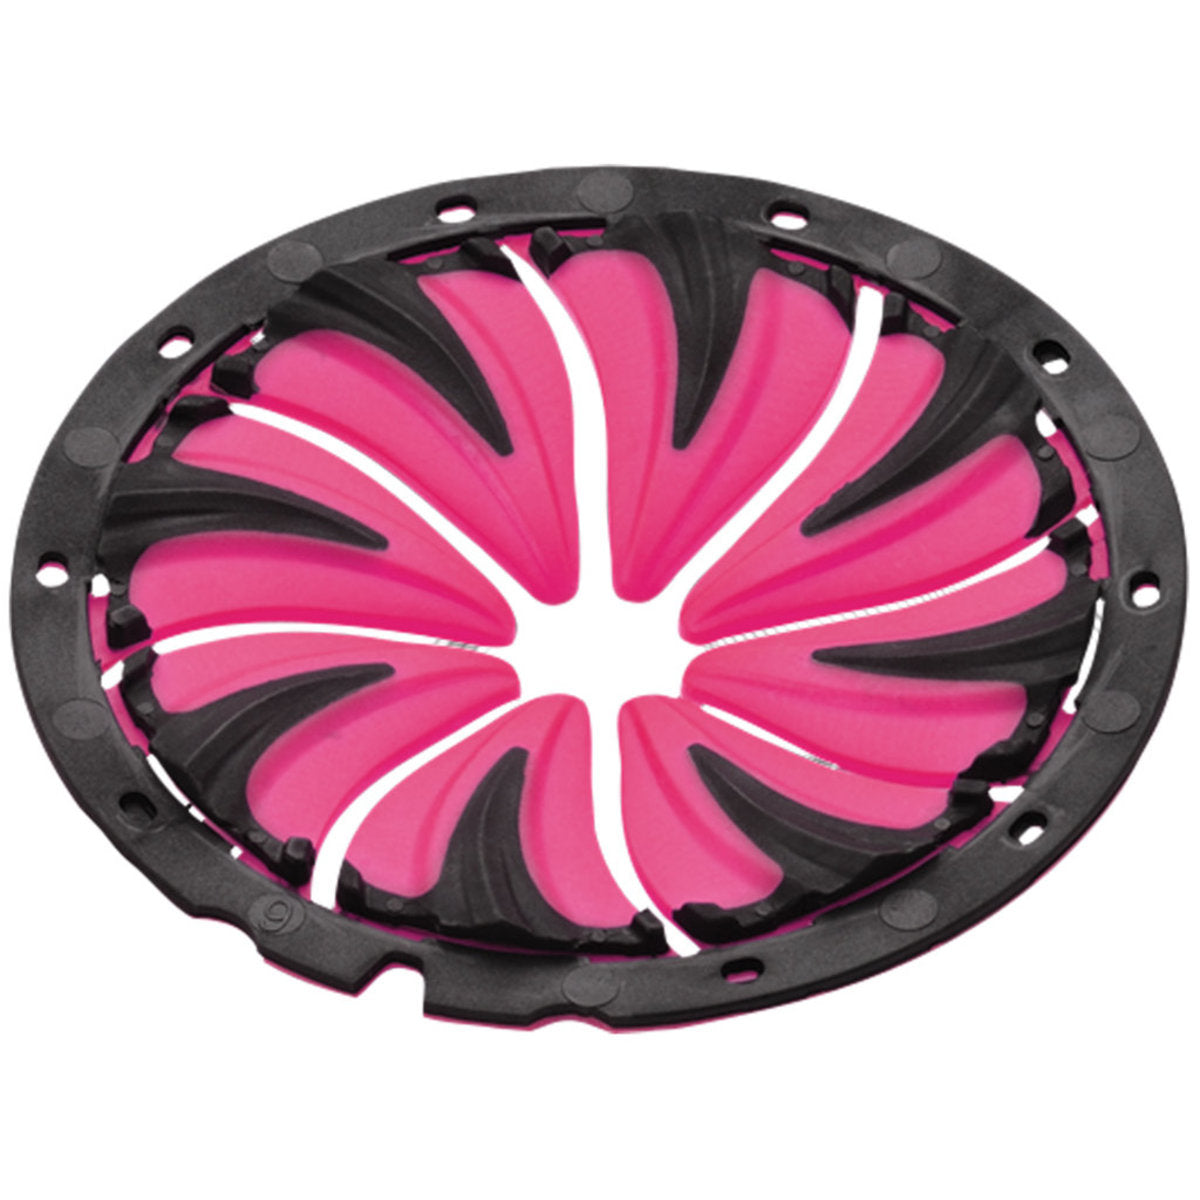 Dye Rotor Quickfeed Paintball Loader Accessory - Black/Pink